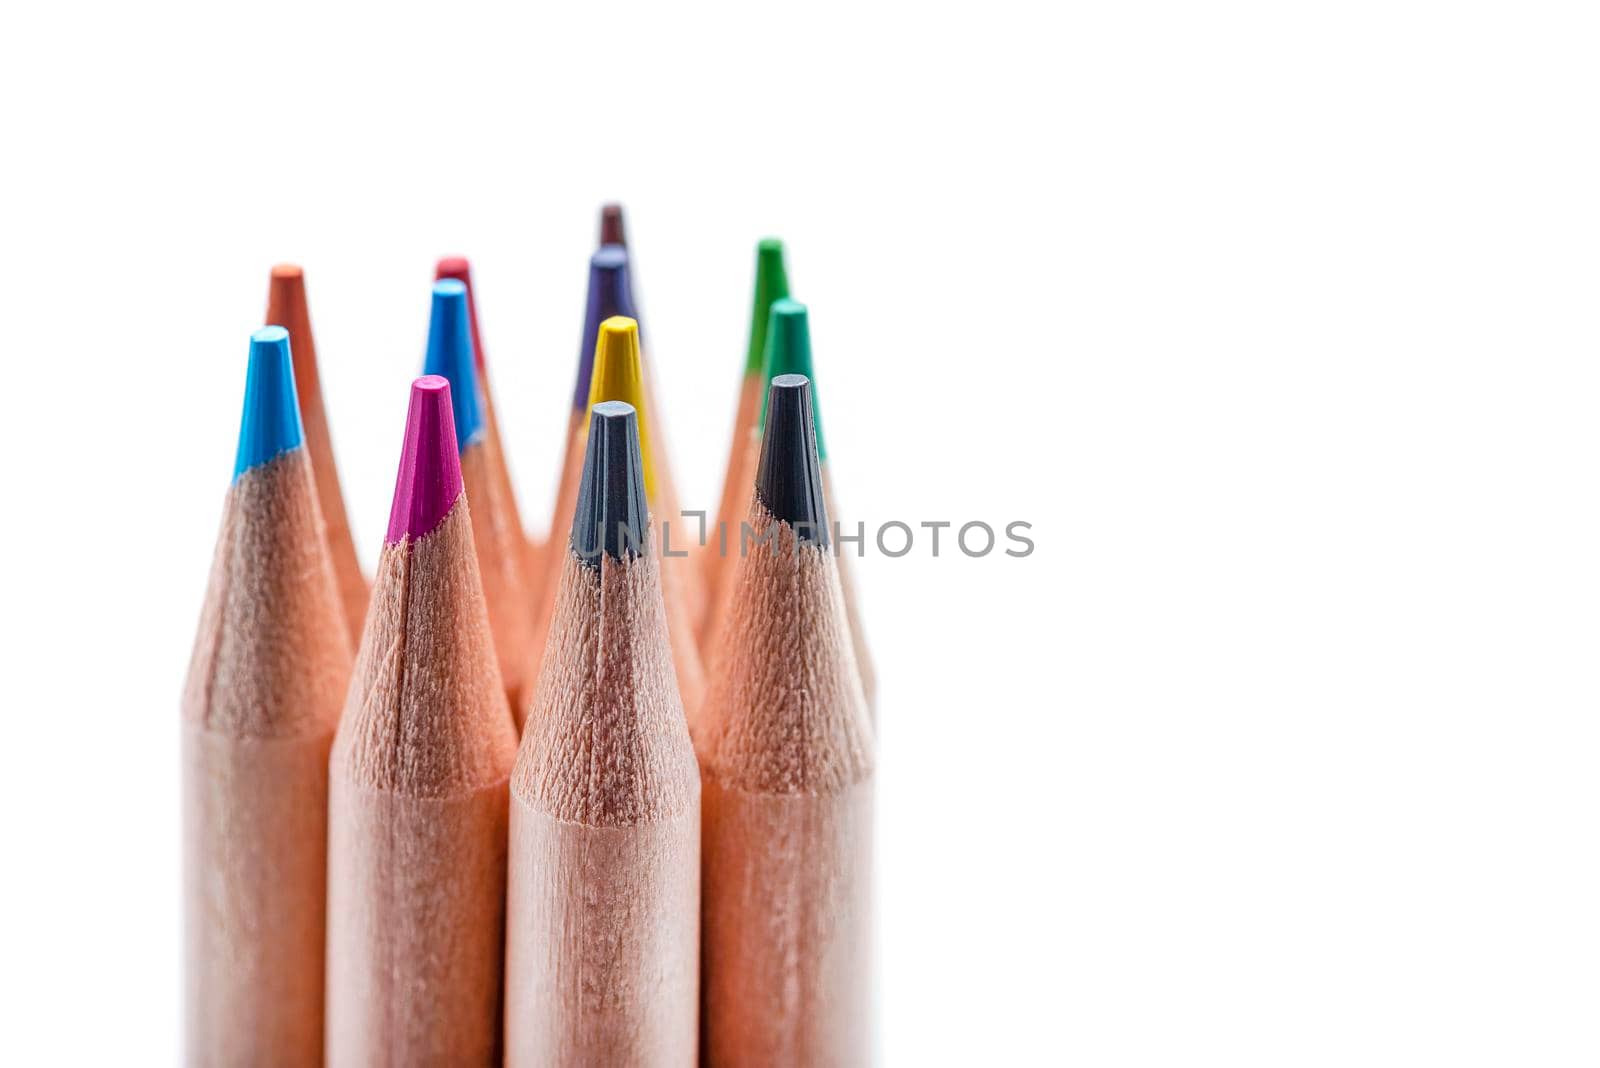 Isolate of multicolored wooden pencils. Pencils of different colors stand out against a uniform white background, for insertion into a project or for printing a banner or label